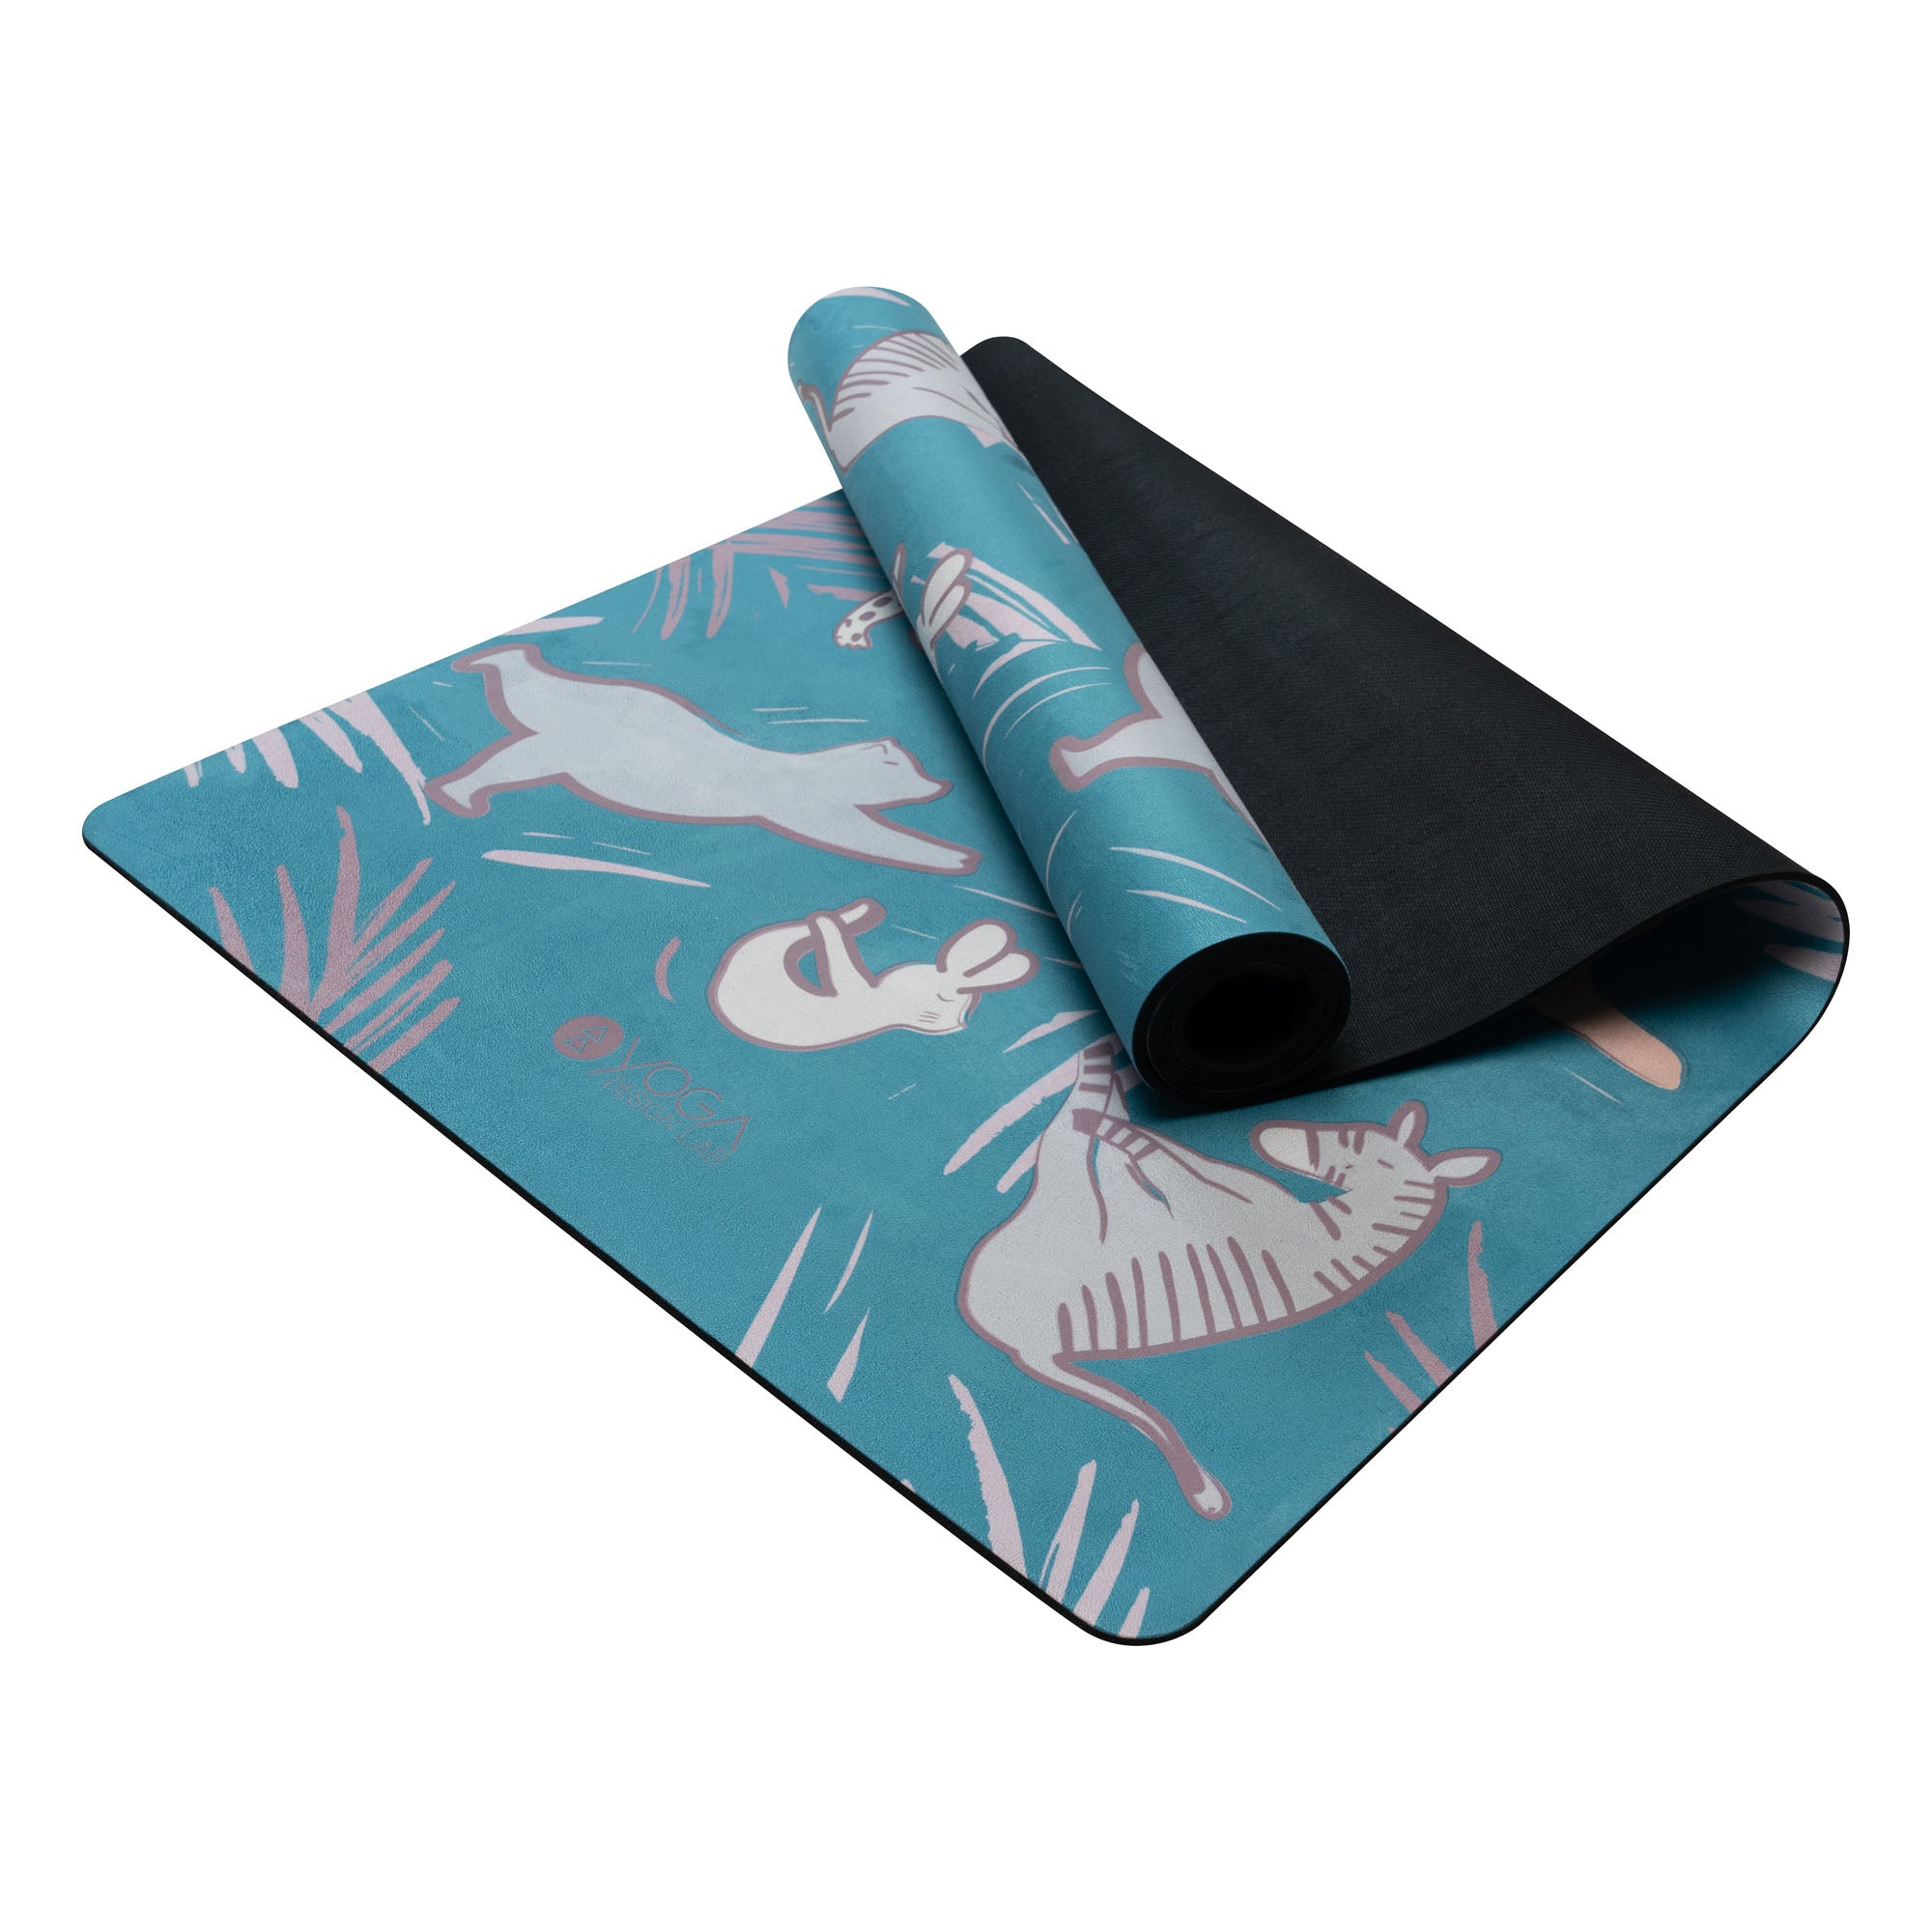 YDL Cork Yoga Mat - Best For Eco-Conscious Yogis